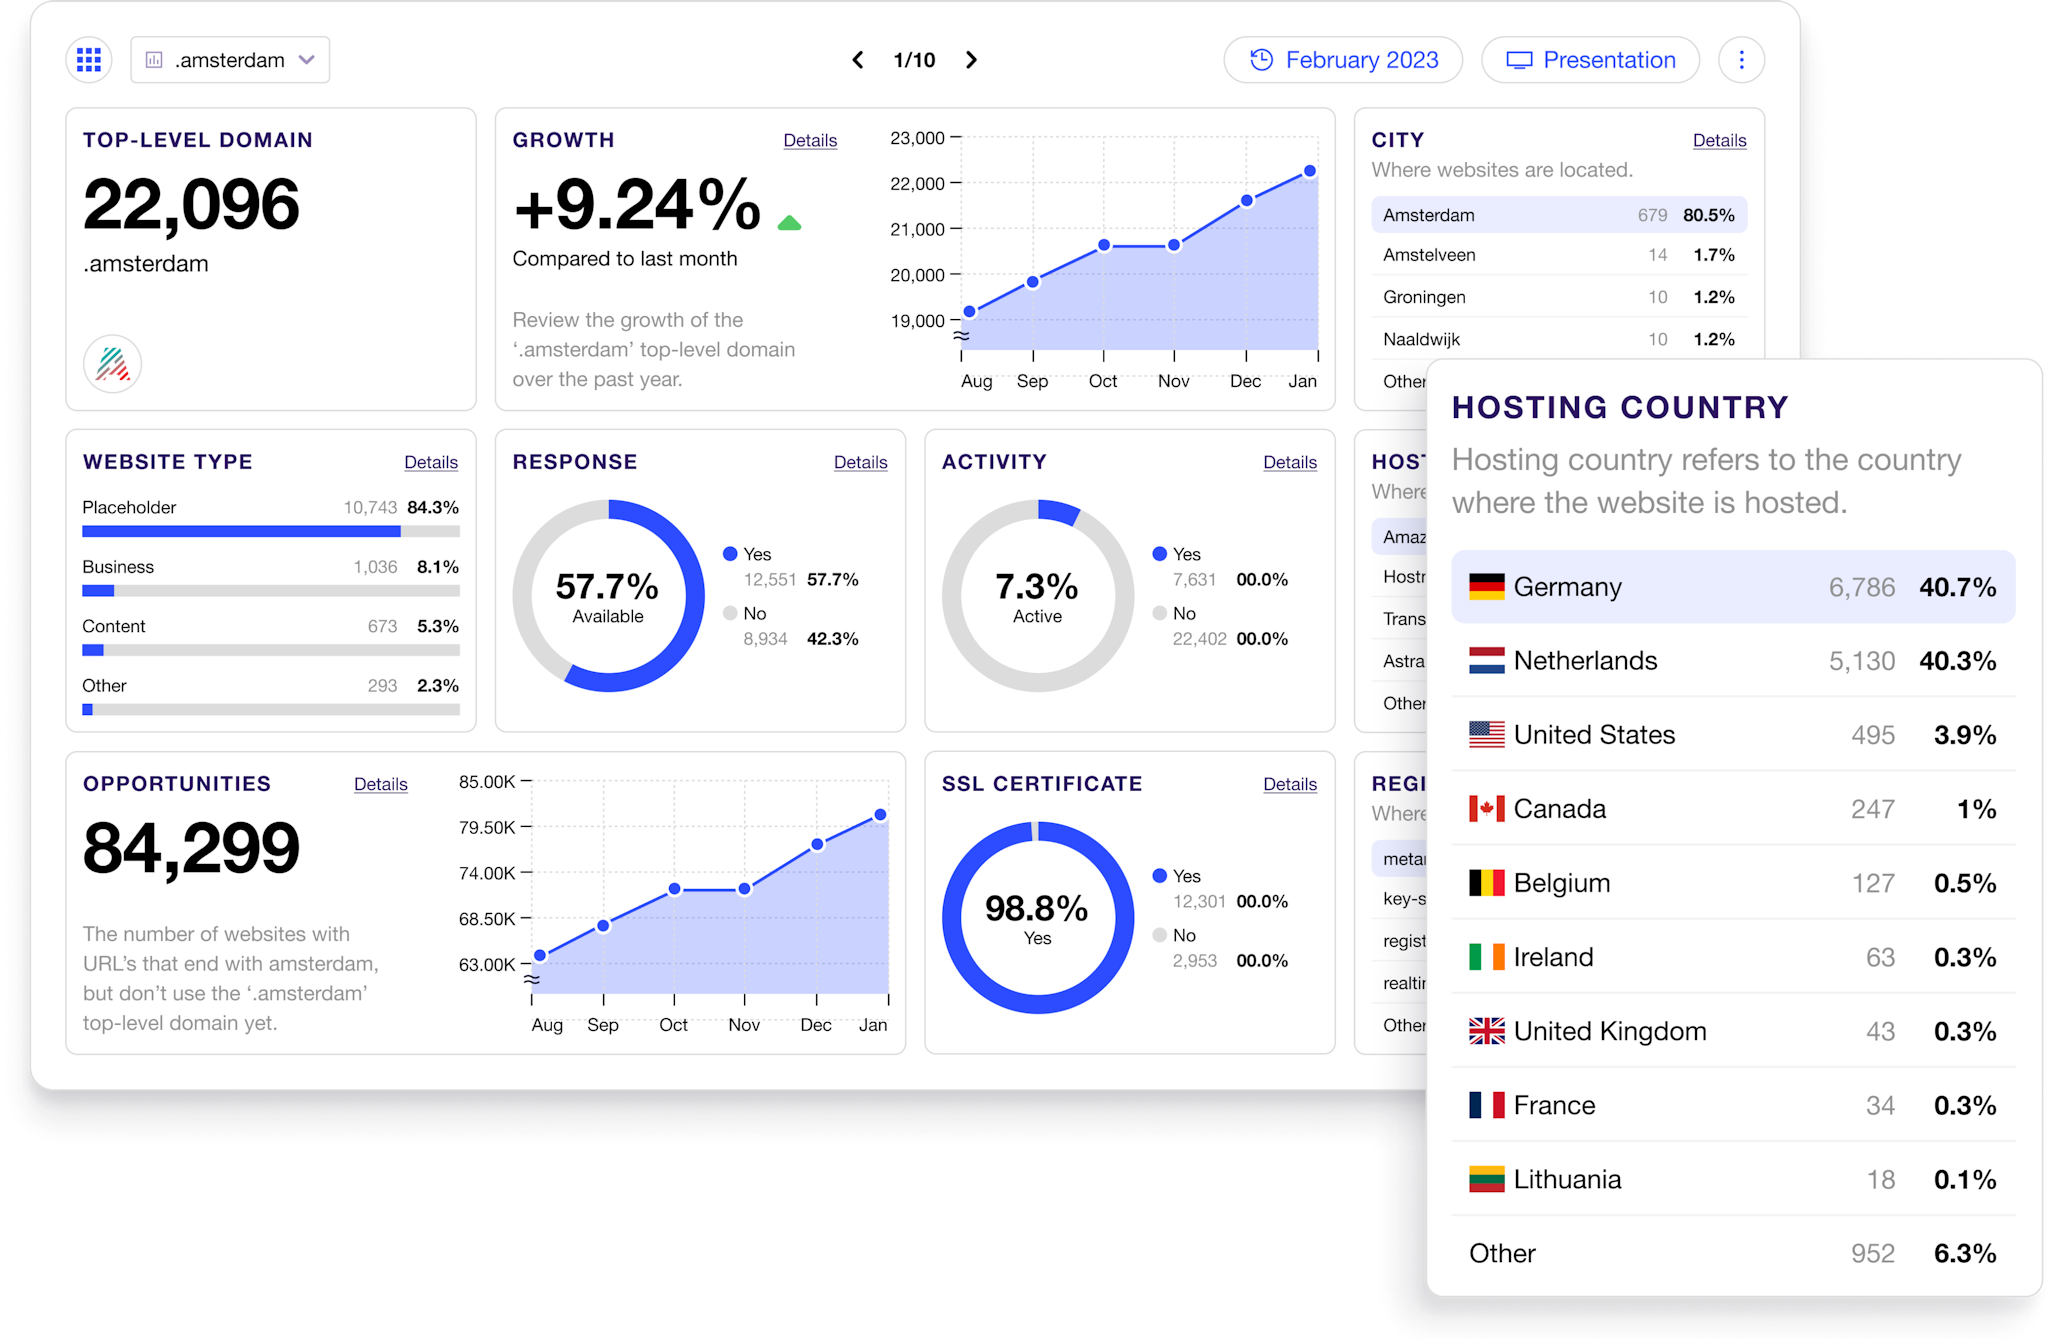 A personalized view of your key metrics and trends